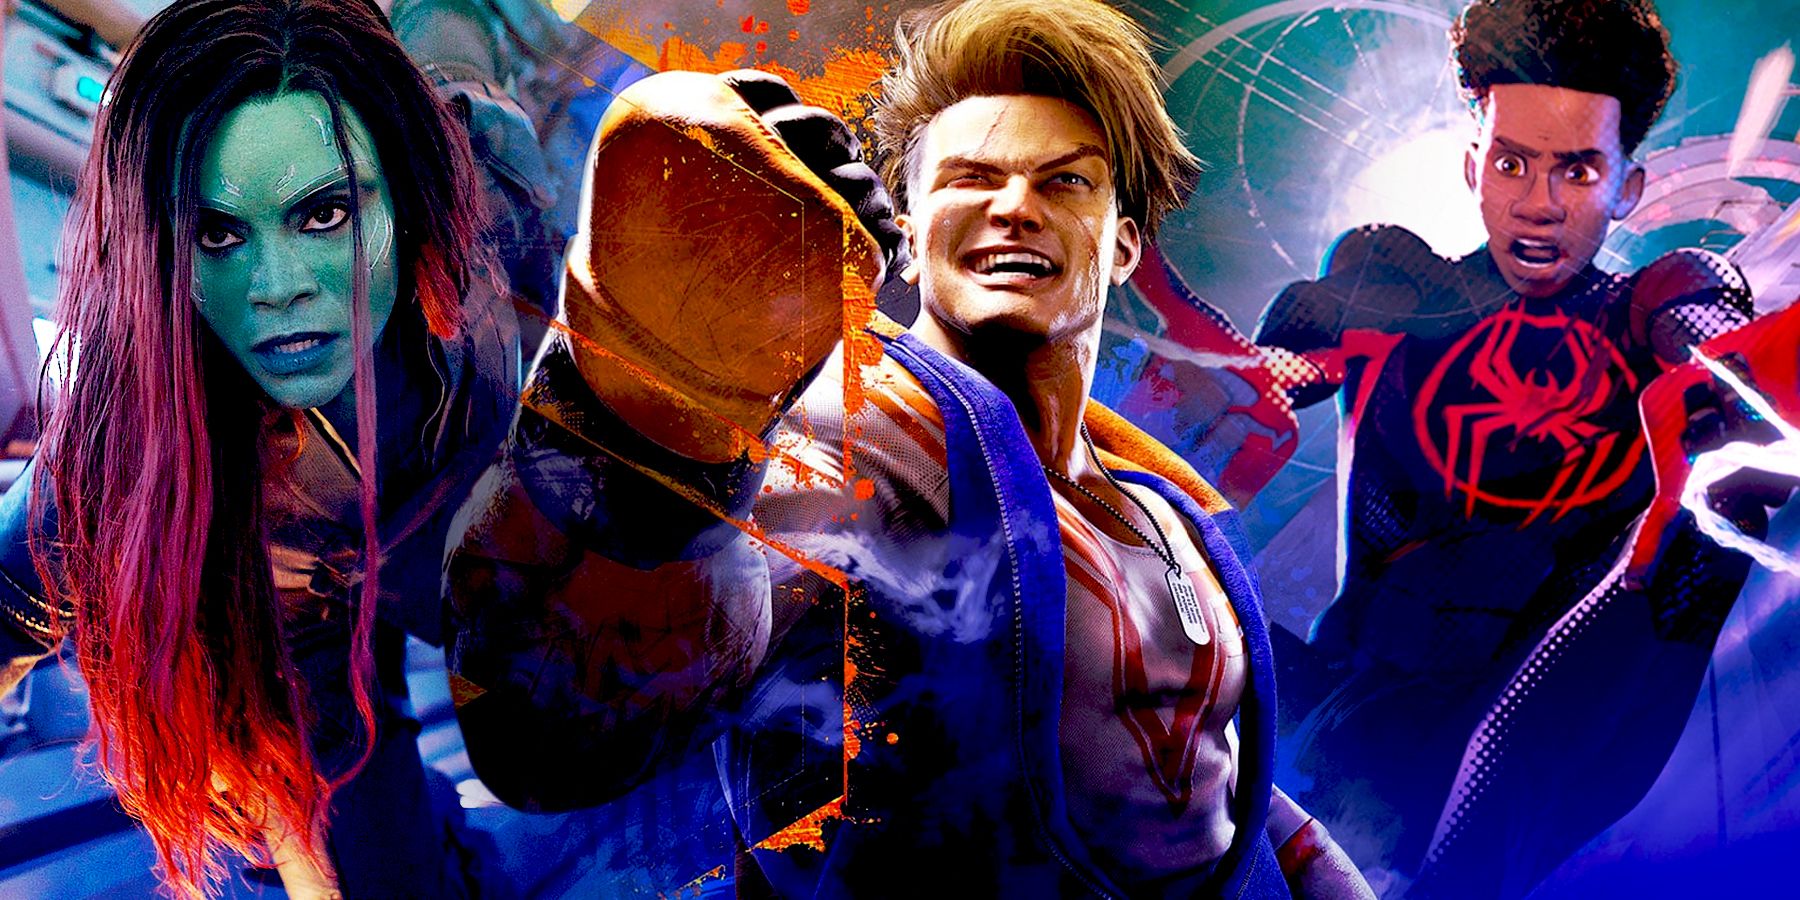 5 features in which Street Fighter 6 and Mortal Kombat 1 are